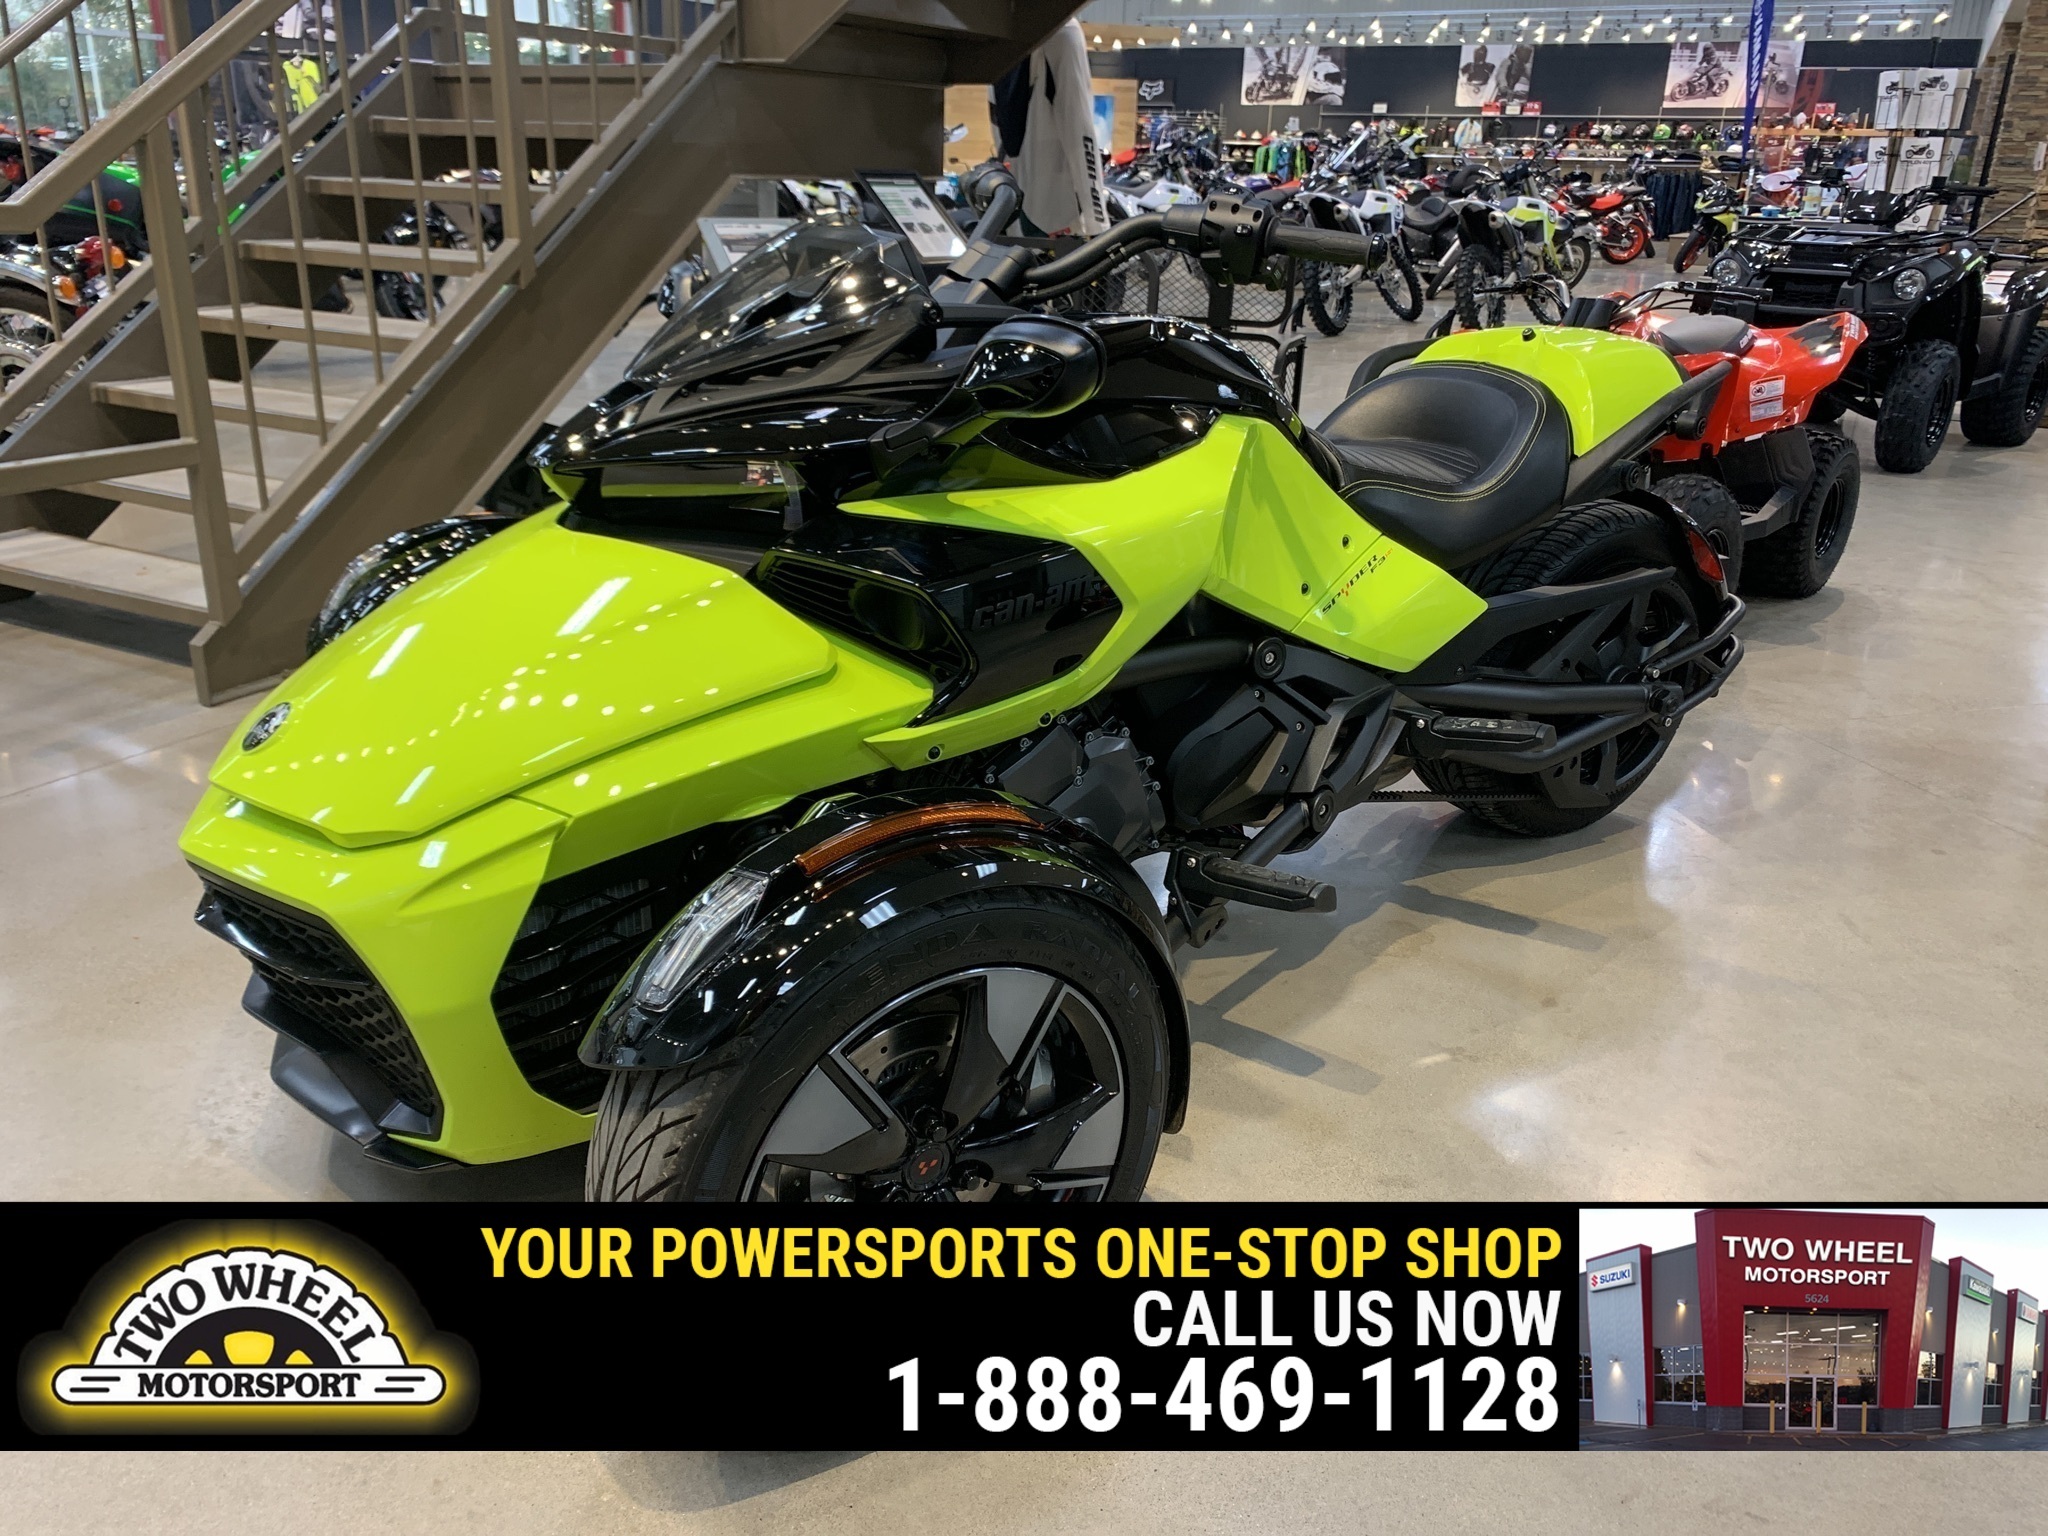 2022 Can-Am Spyder F3-S Special Series F3-S SE6 SPECIAL EDITION